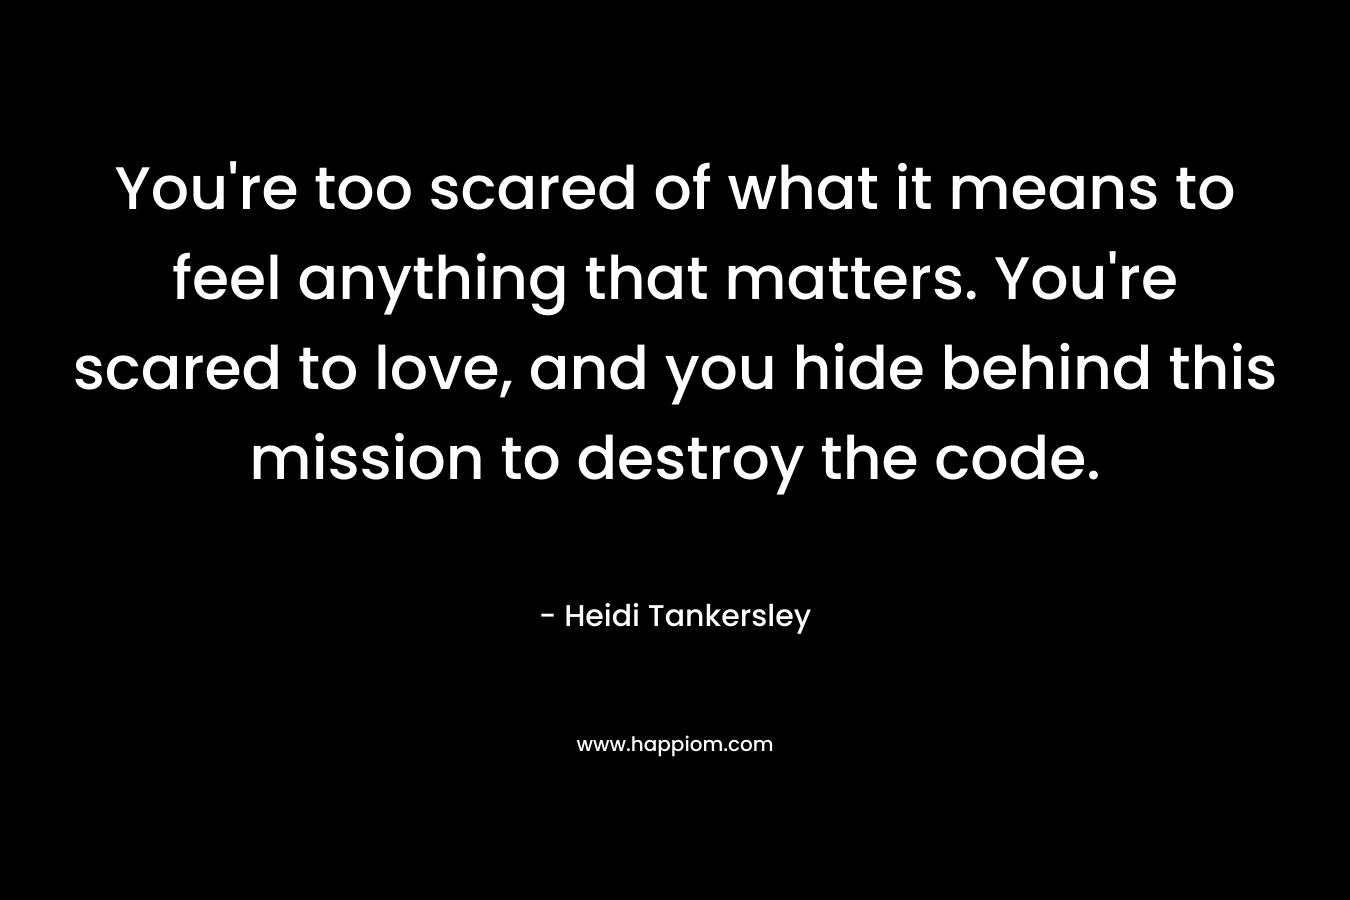 You’re too scared of what it means to feel anything that matters. You’re scared to love, and you hide behind this mission to destroy the code. – Heidi Tankersley